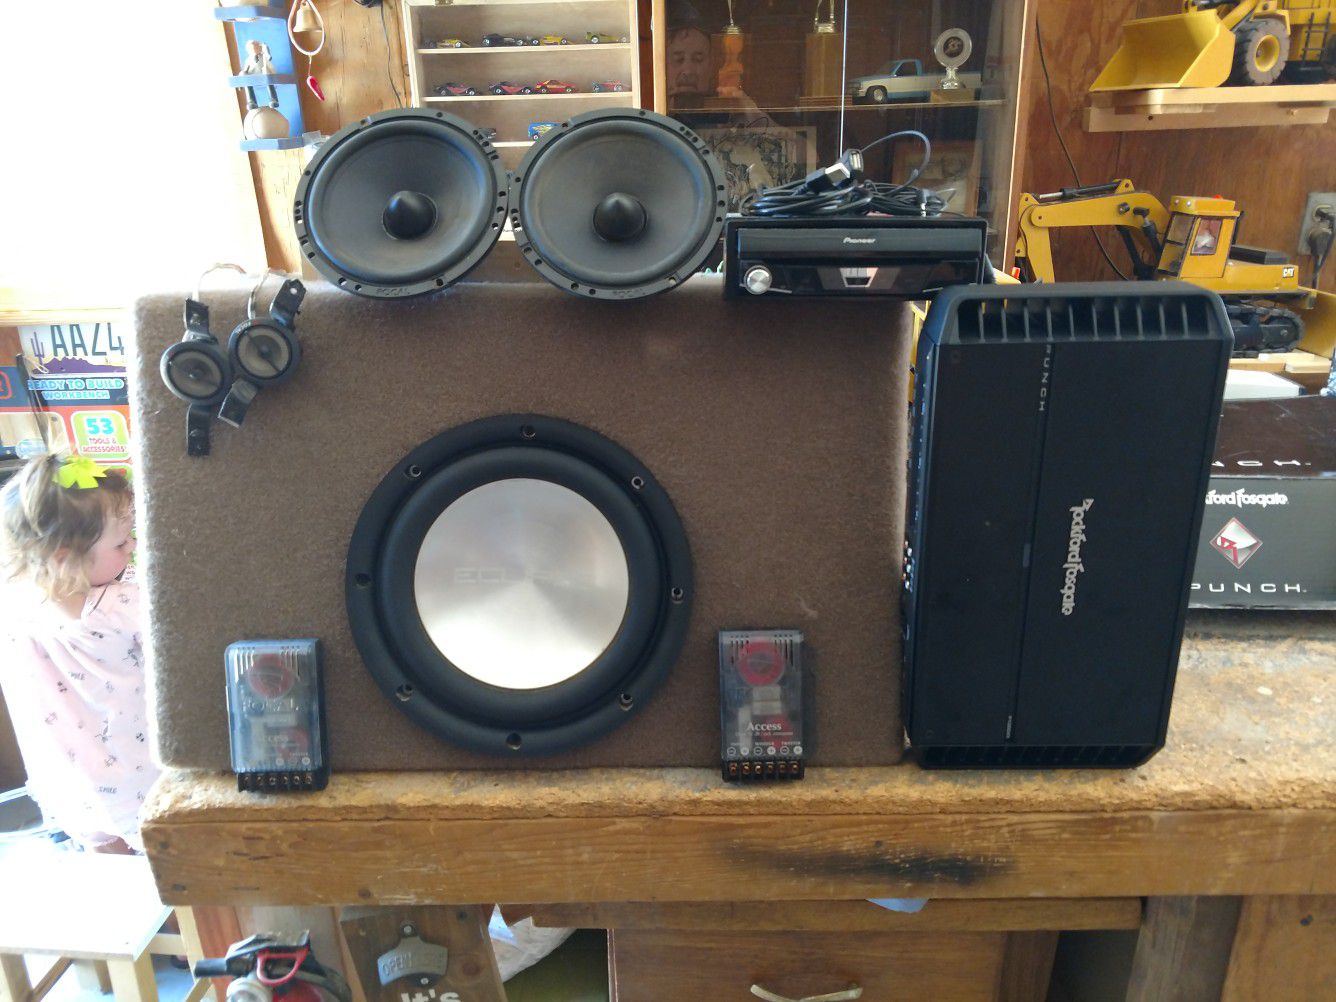 Complete stereo system. We'll sell individually